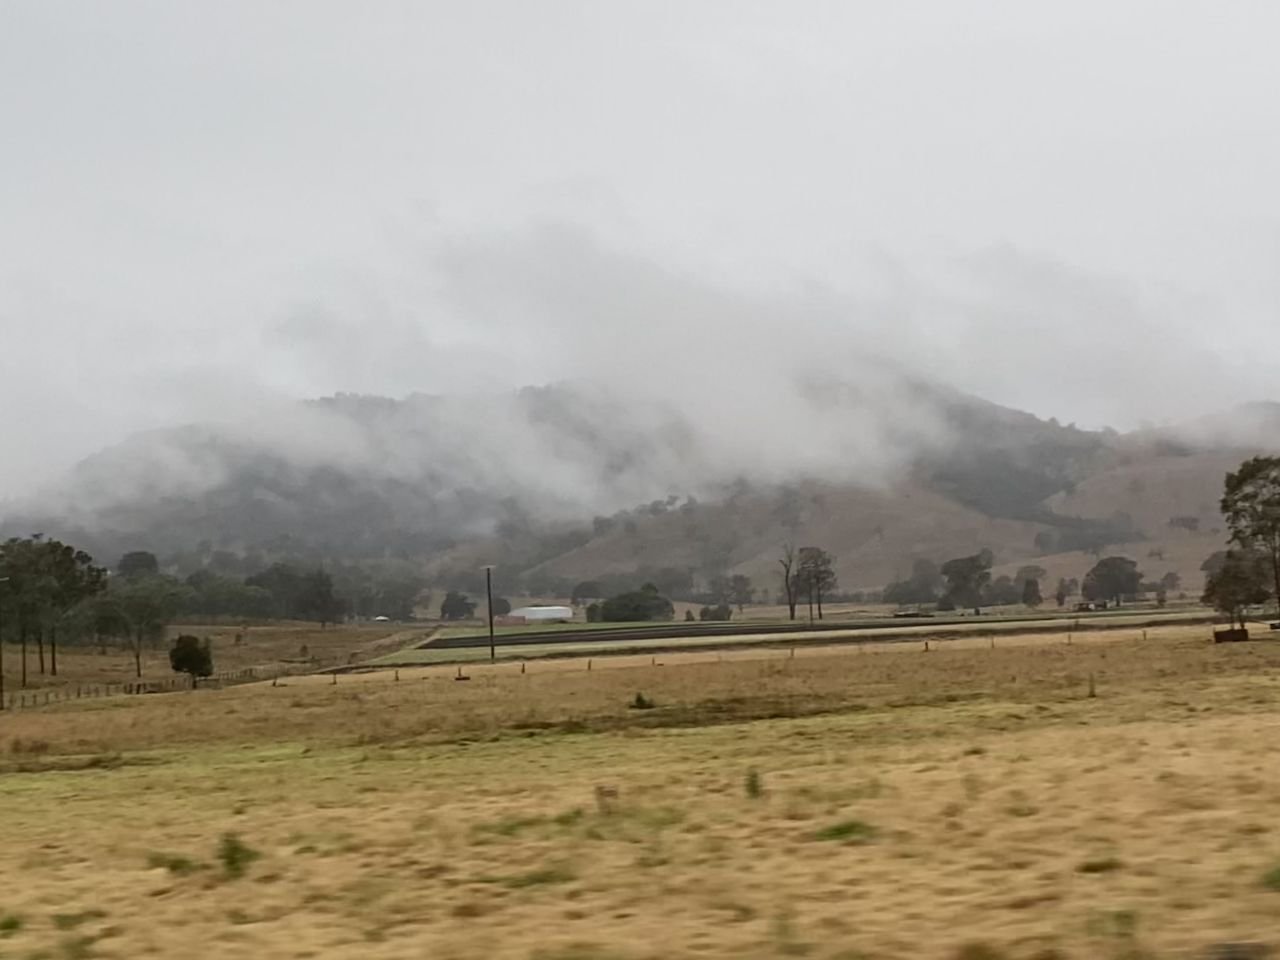 Country scenery during Scenic Rim bus trip July 2022